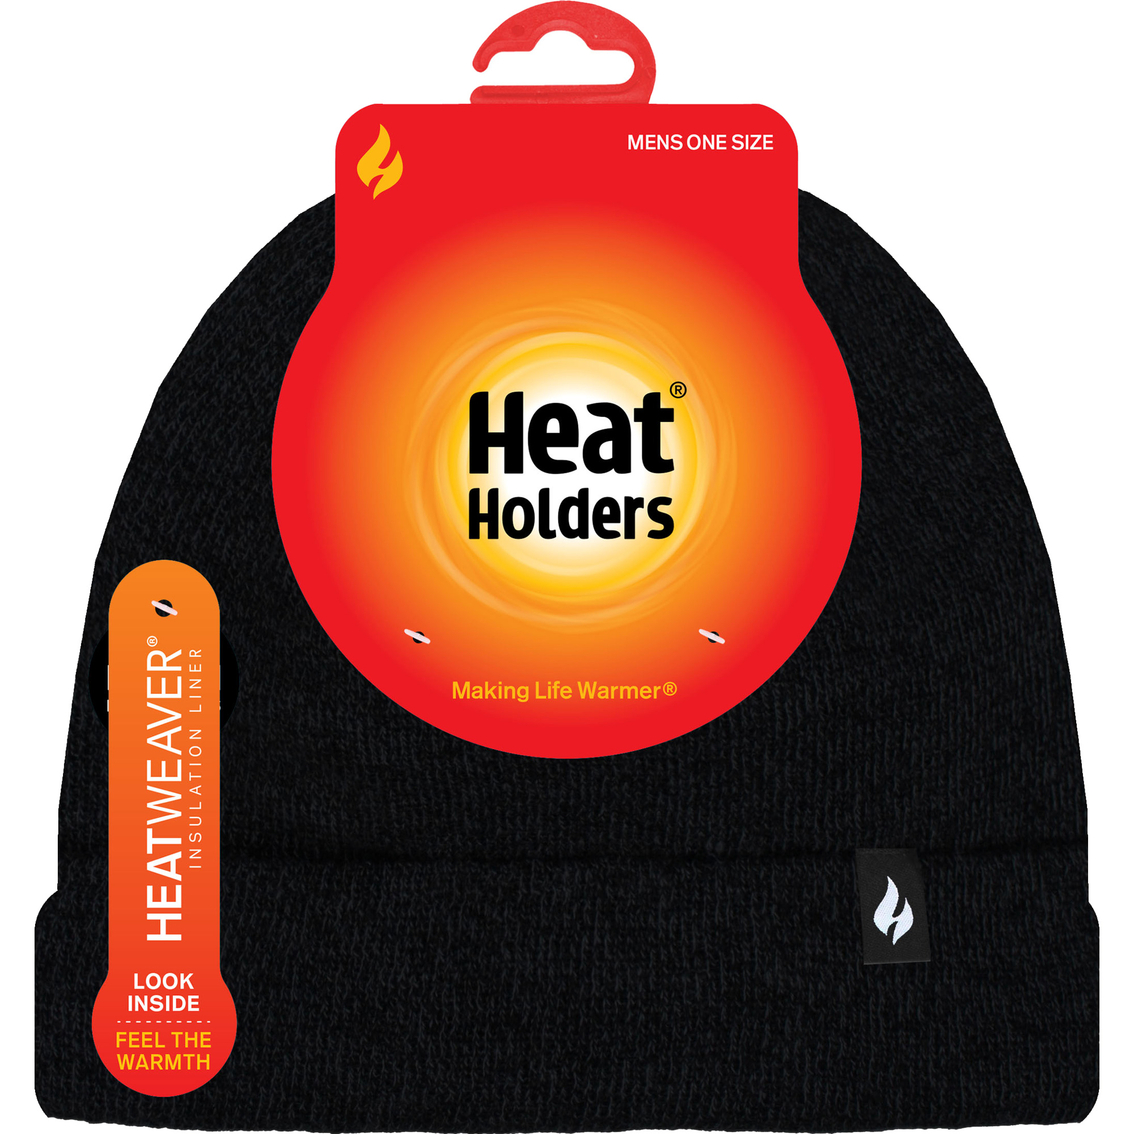 Heat Holders Roll Up Knit Cap - Image 2 of 2